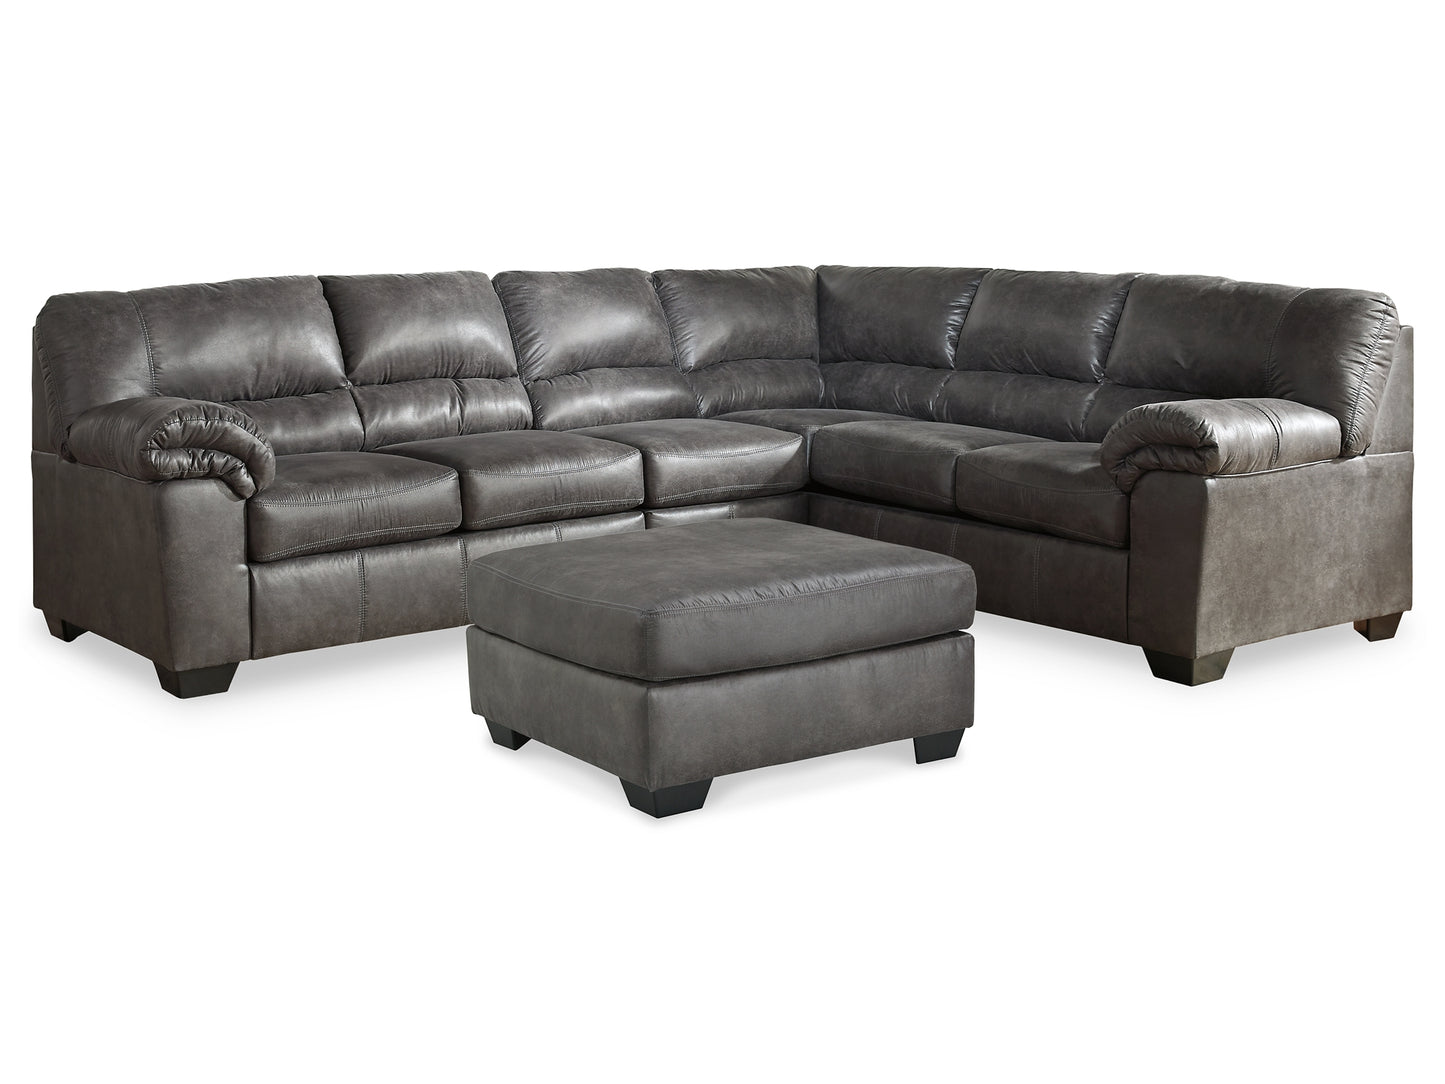 Bladen 3-Piece Sectional with Ottoman JB's Furniture  Home Furniture, Home Decor, Furniture Store